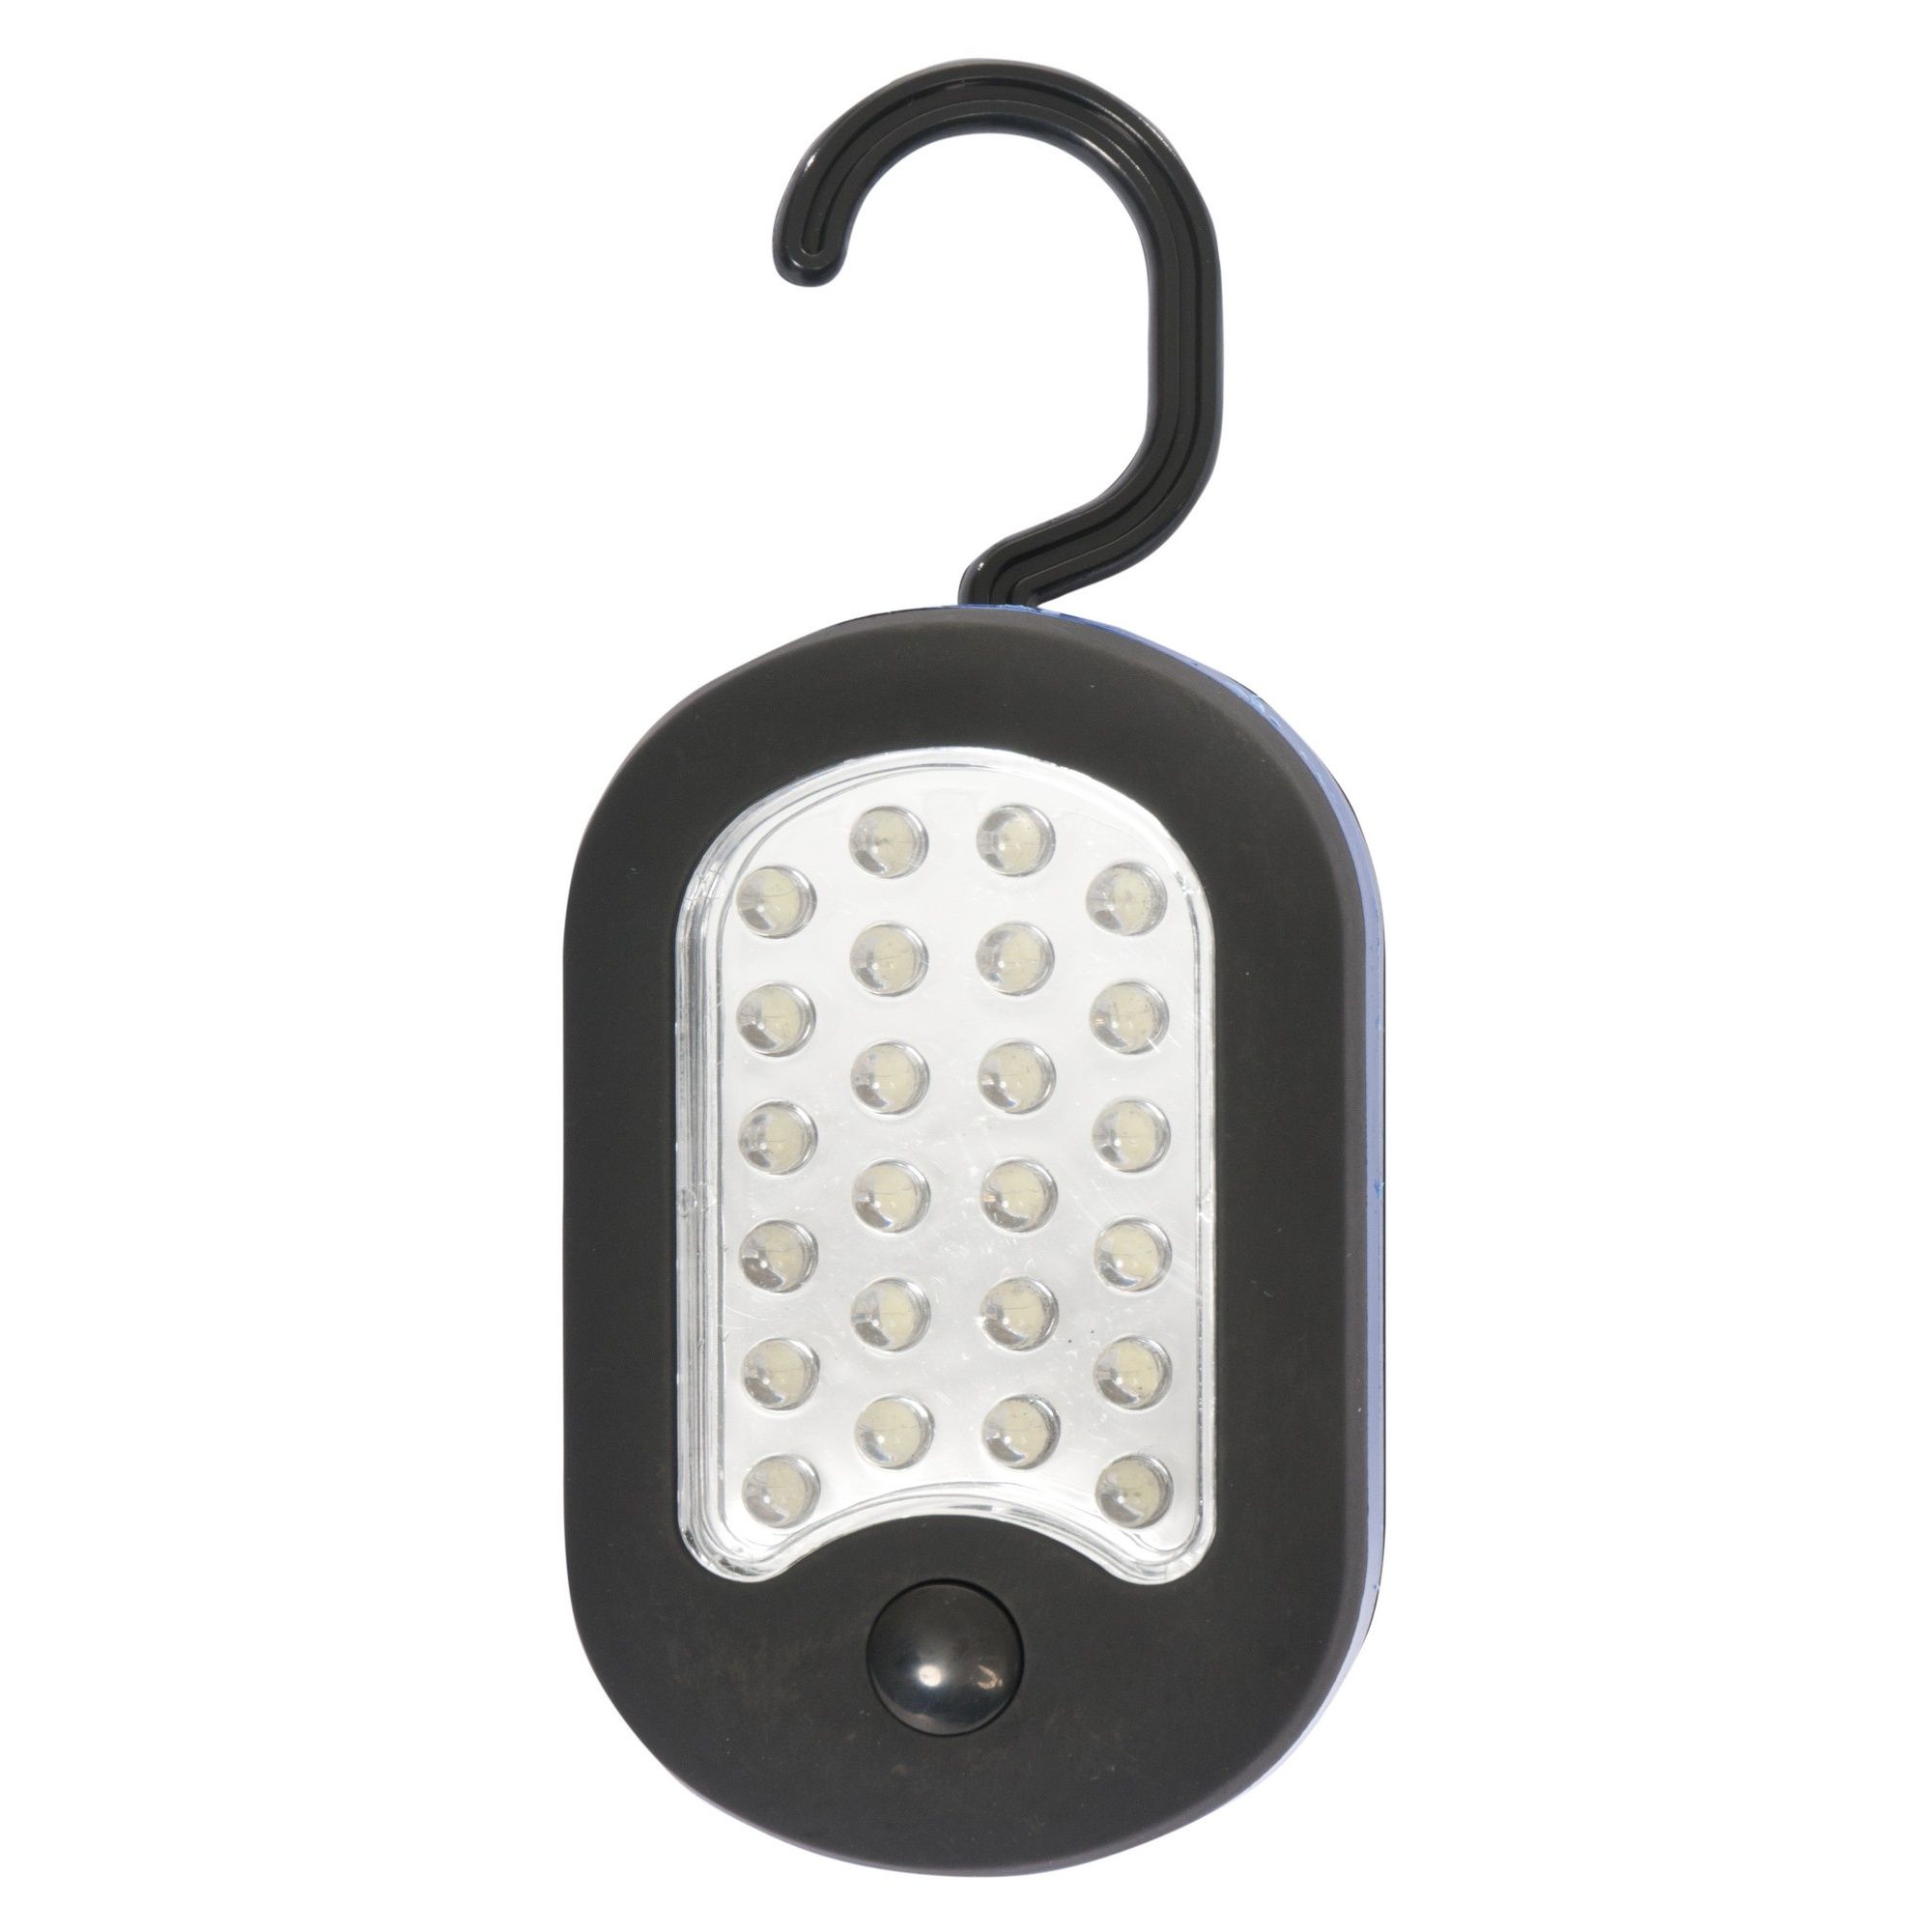 27 LED lamp. Torch and lamp functions. Fold away hanging hook. Magnet attachment on back. Requires 3 AAA batteries (not included). Dimensions: 95mm (h) x 60mm (w) x 35mm (d).